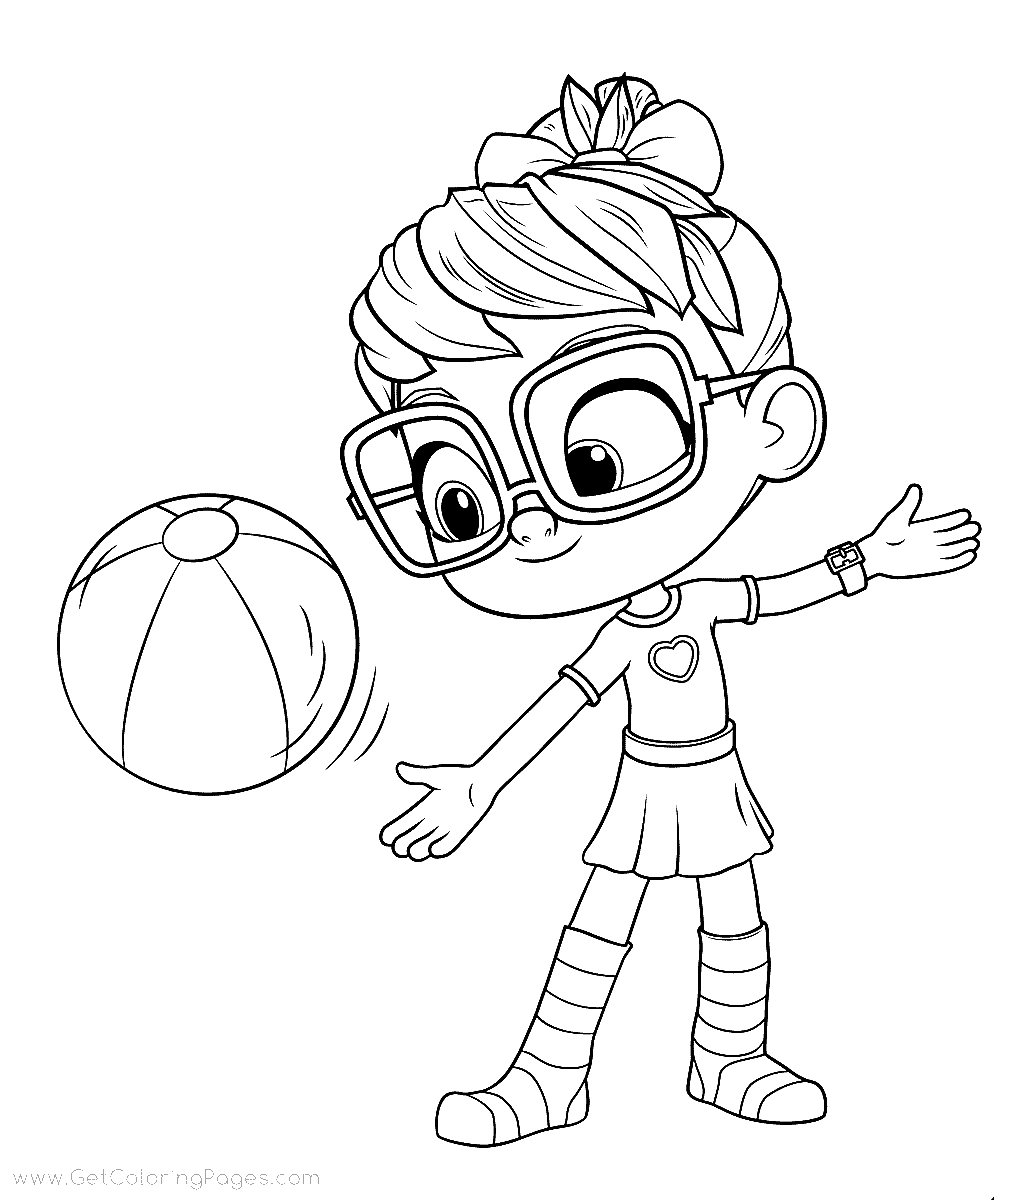 Abby Playing Ball Coloring Pages